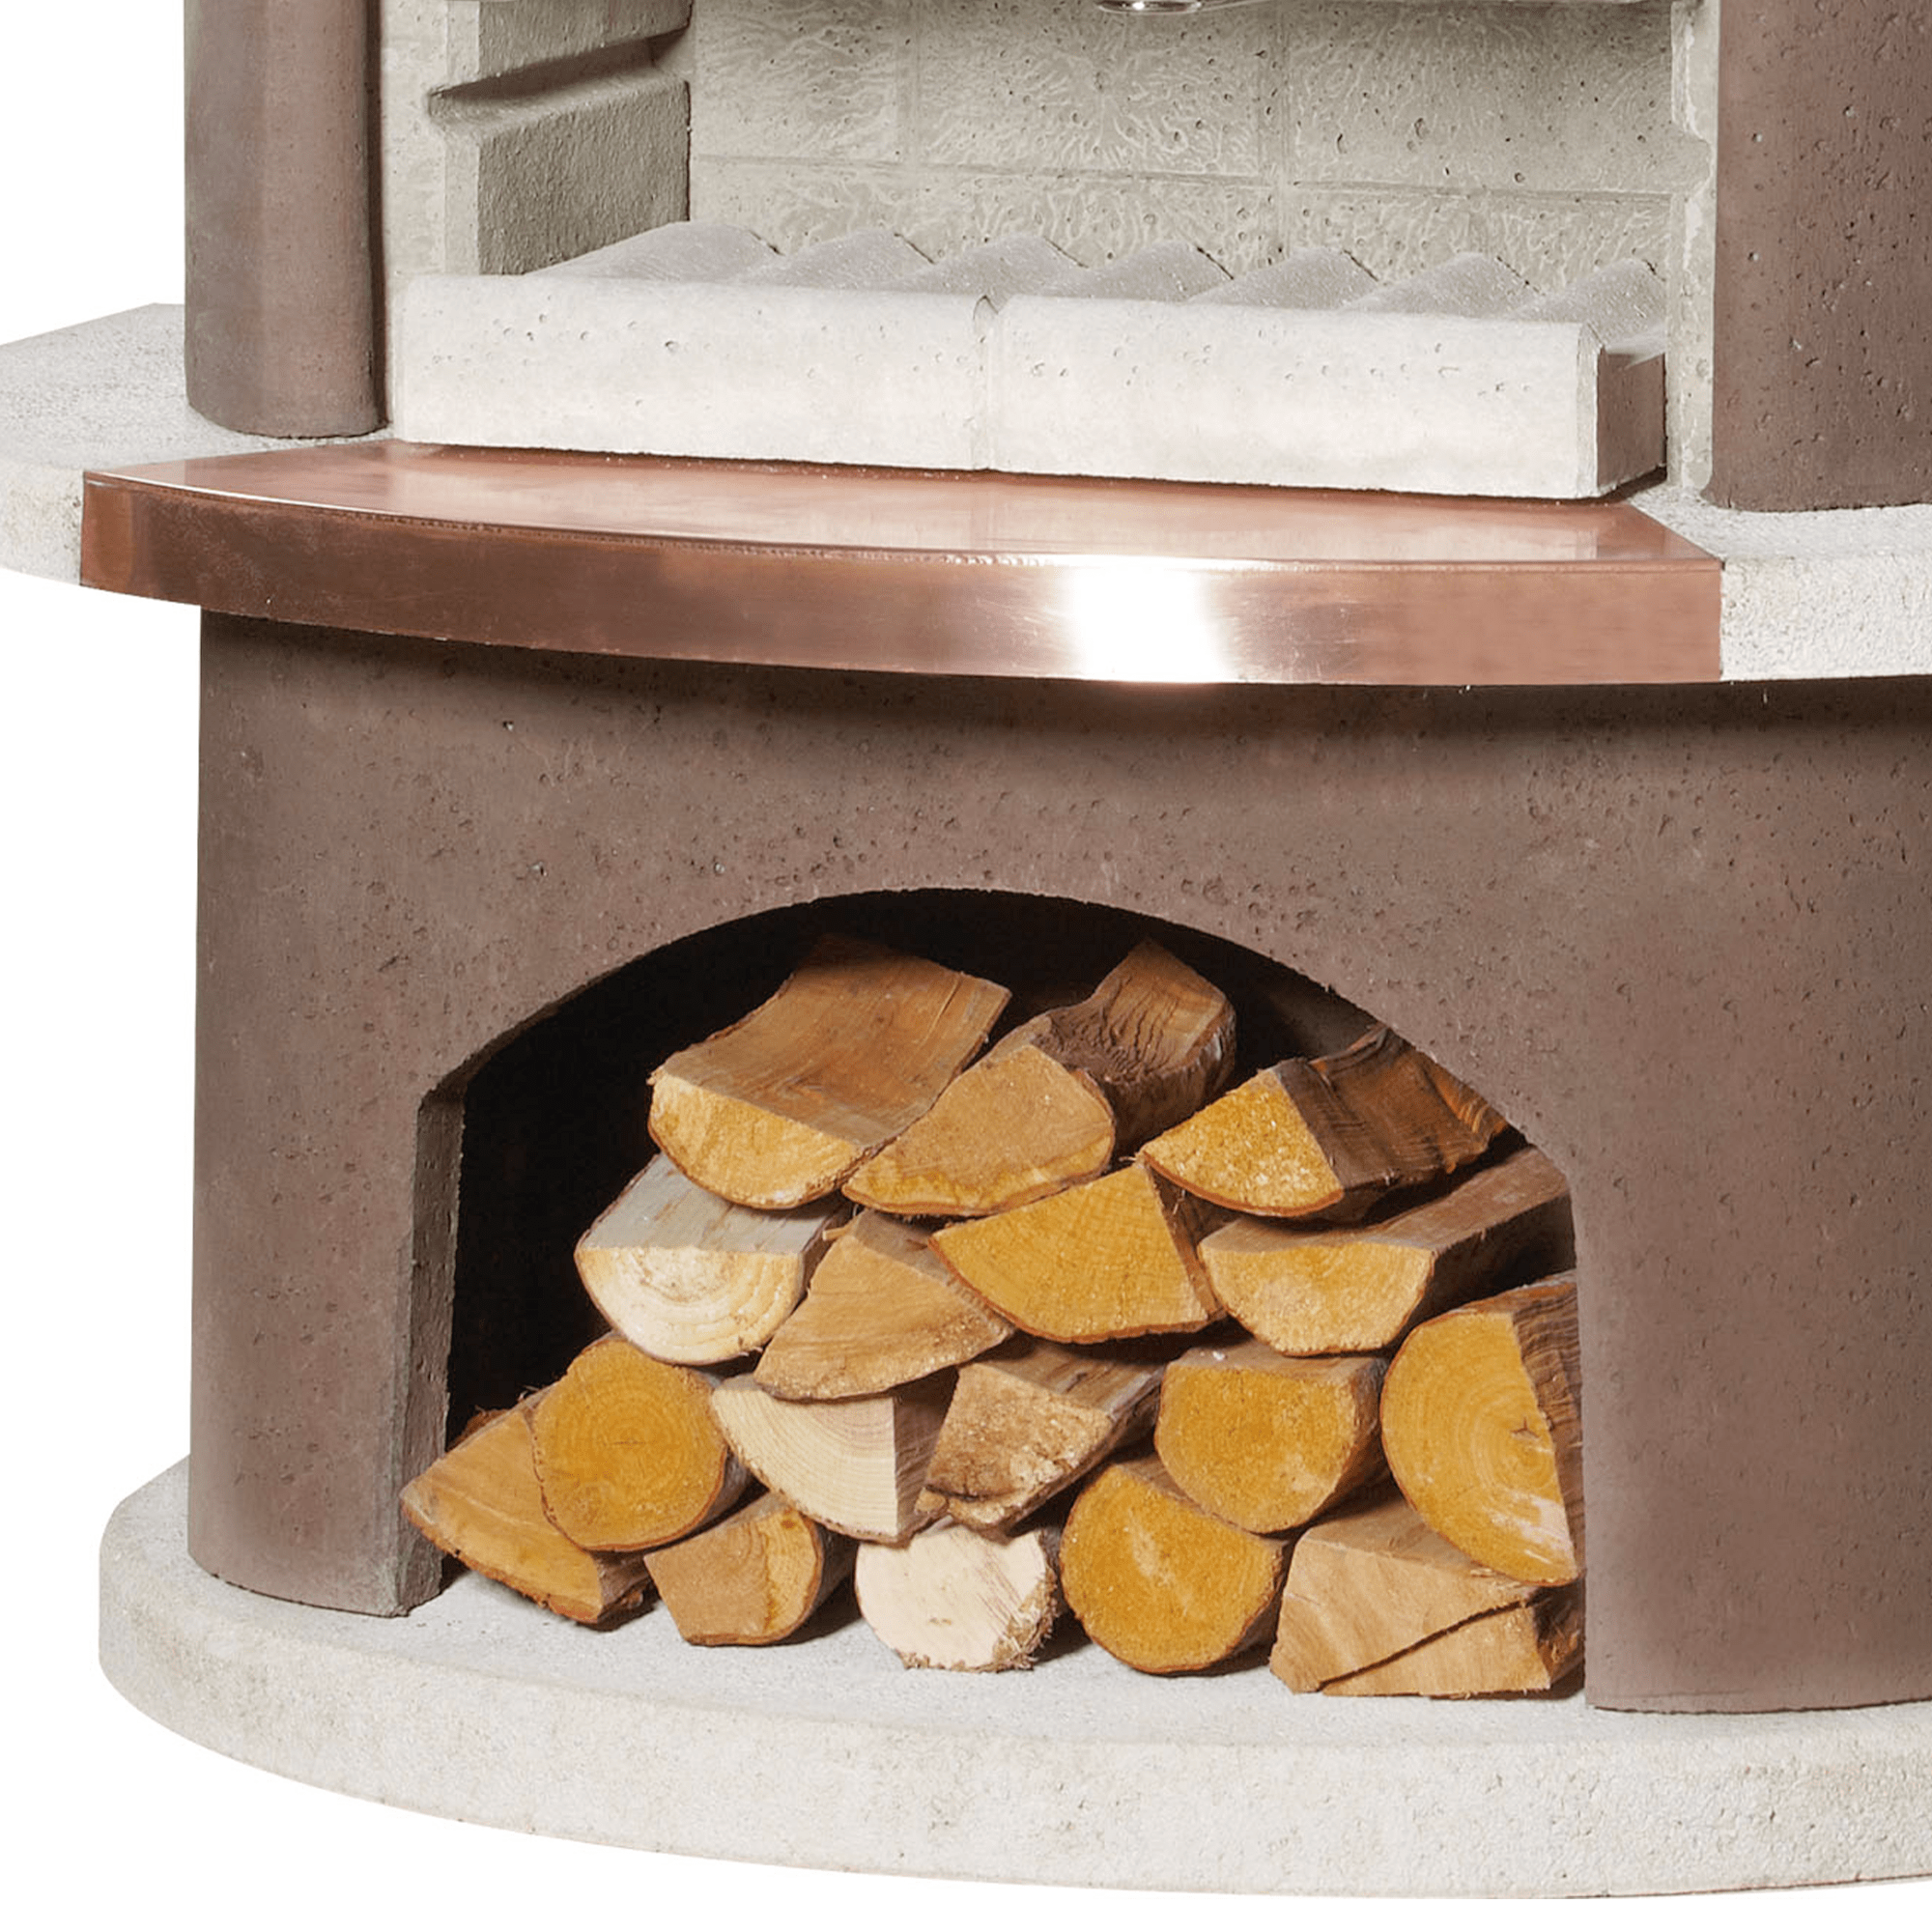 Buschbeck Masonry BBQ Buschbeck Toscana BBQ Masonry Grill | Wood Fired Barbecue & Fireplace